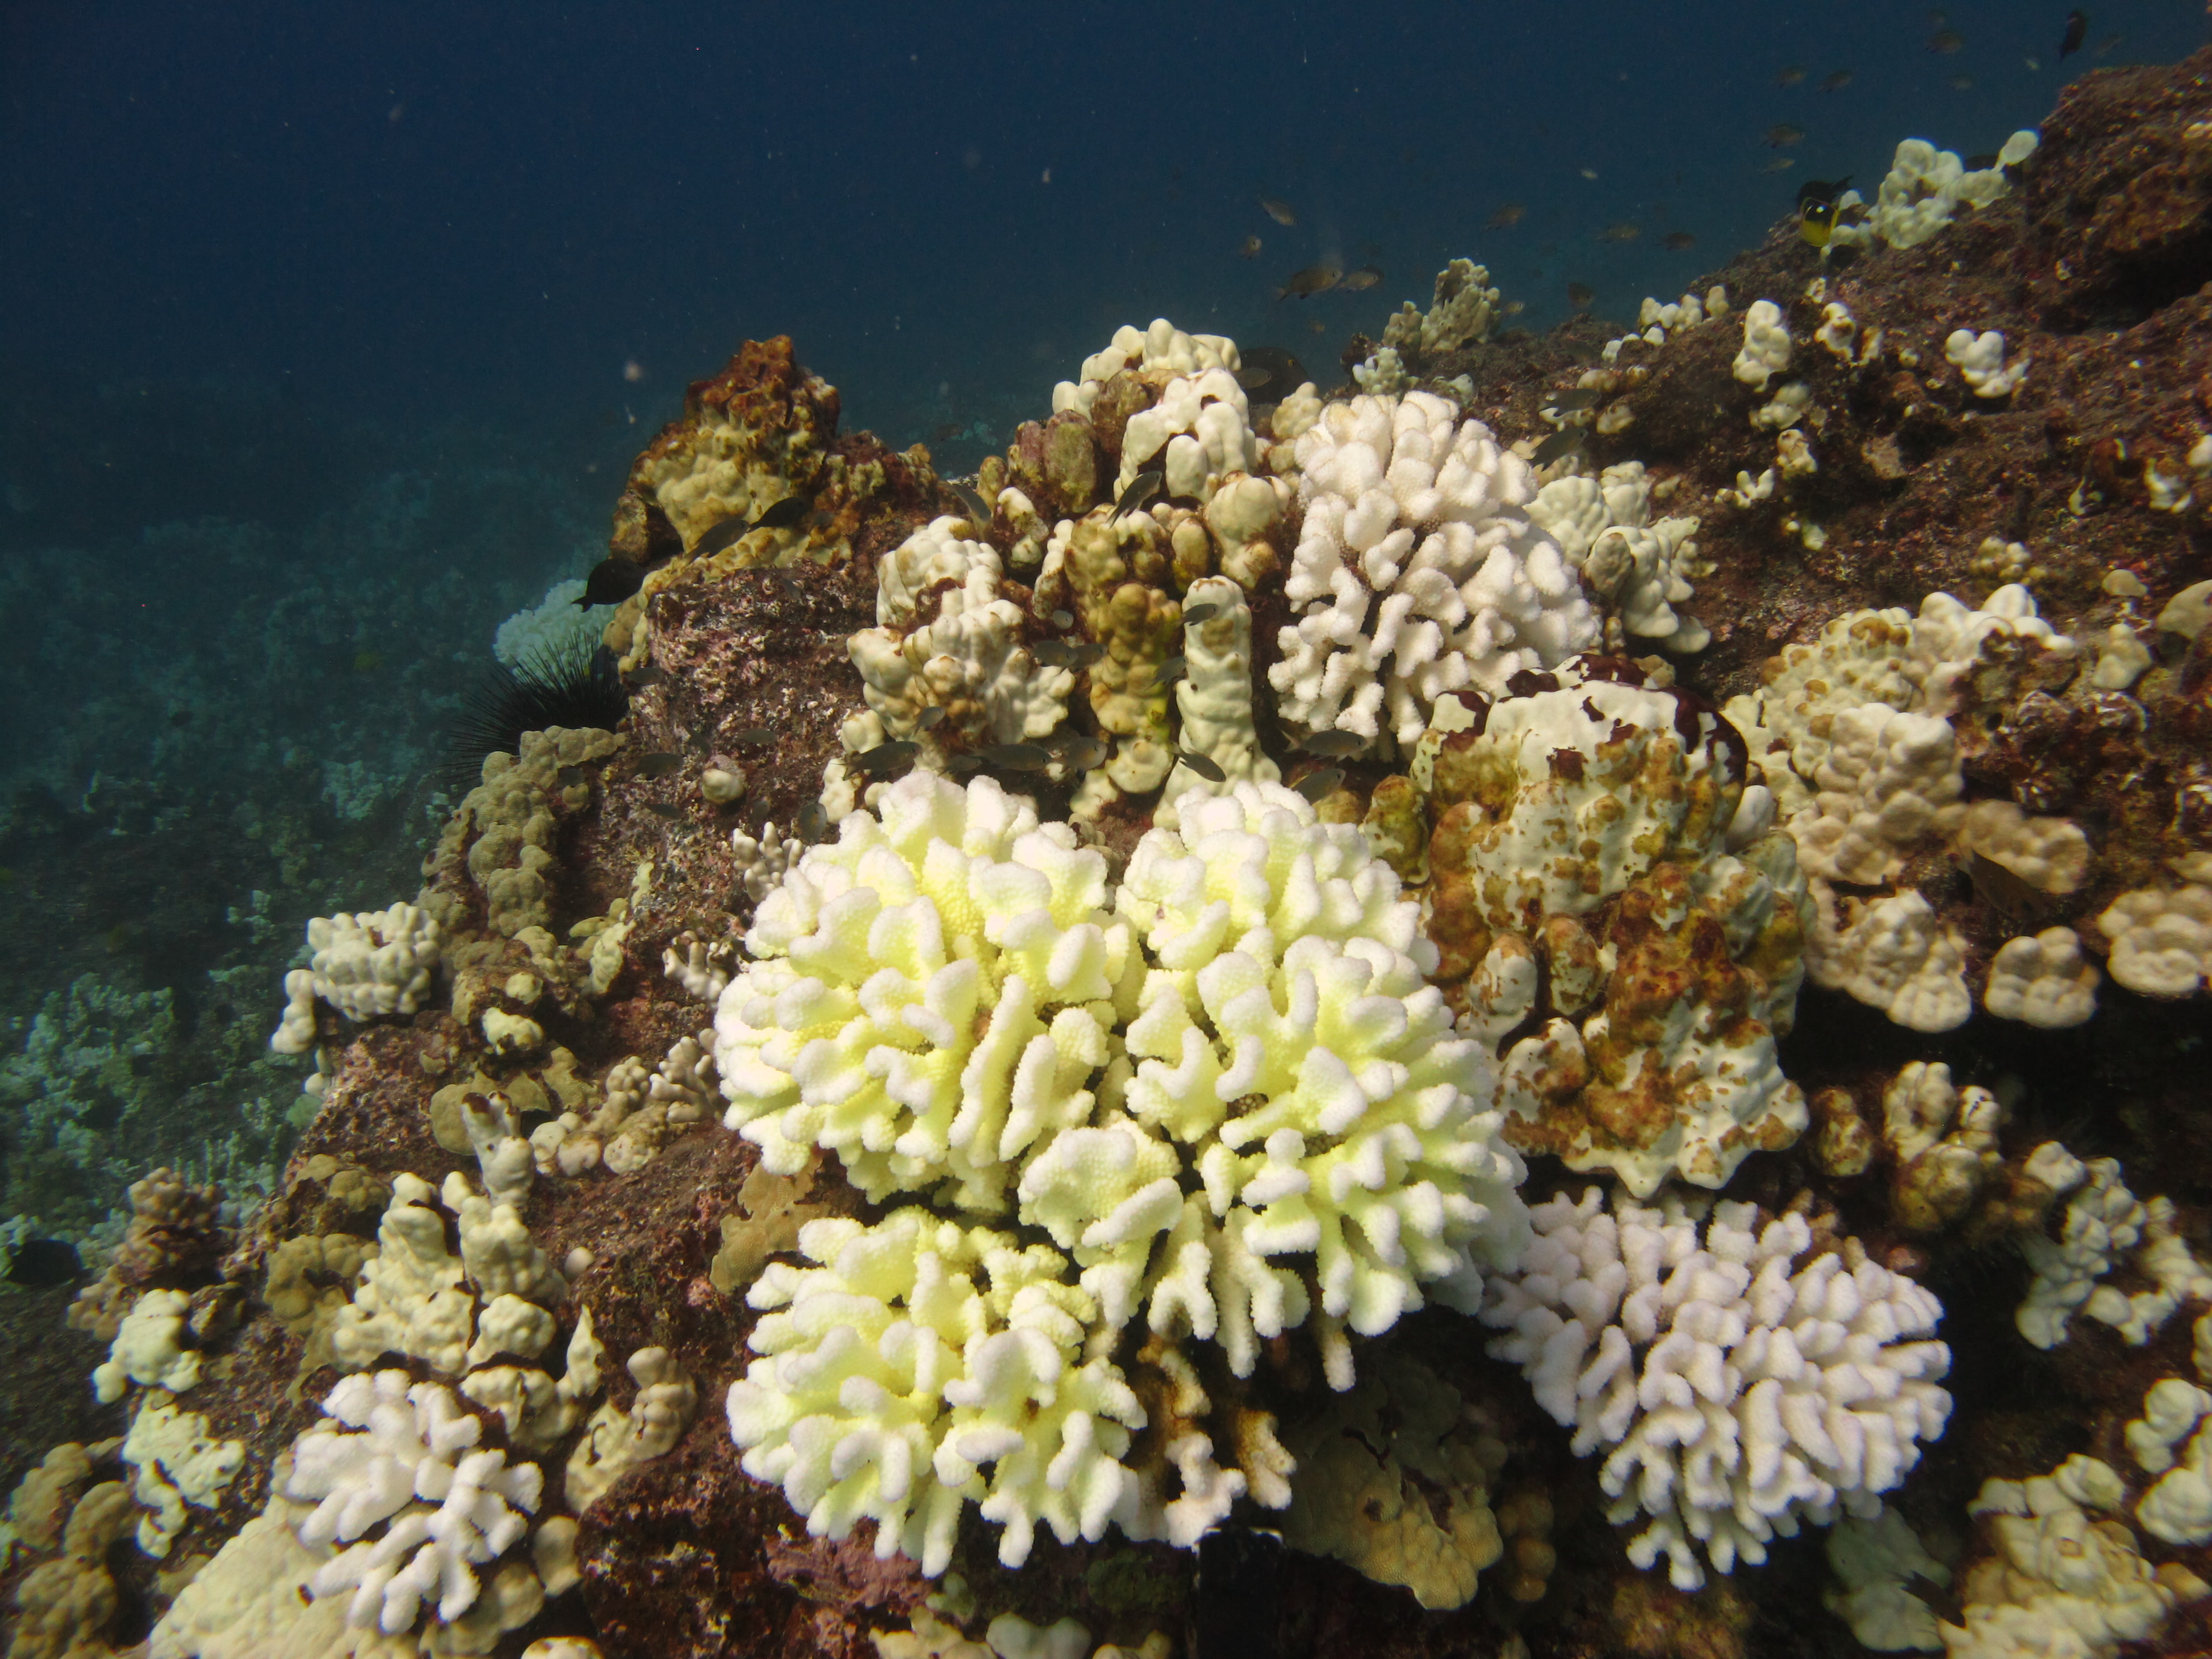 A close-up image of a cluster of yellow and white coral growing on a brown rock underwater.